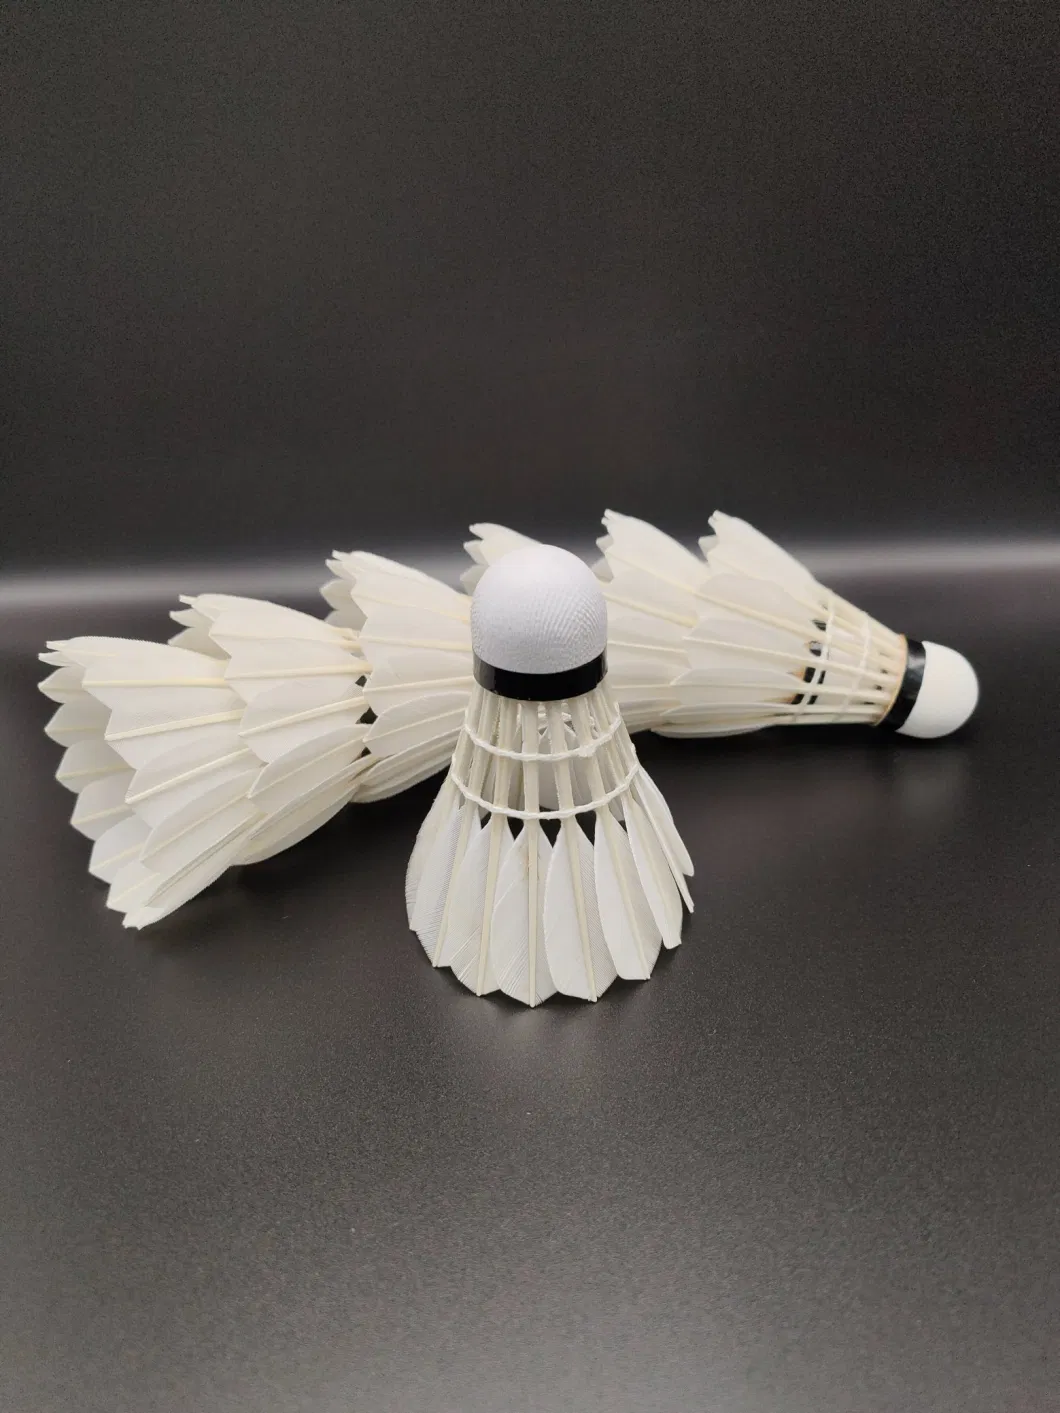 Speed 75 to 78 Straight Goose Feather Badminton Shuttlecocks for Amateur Training or Club Players Shuttlecock